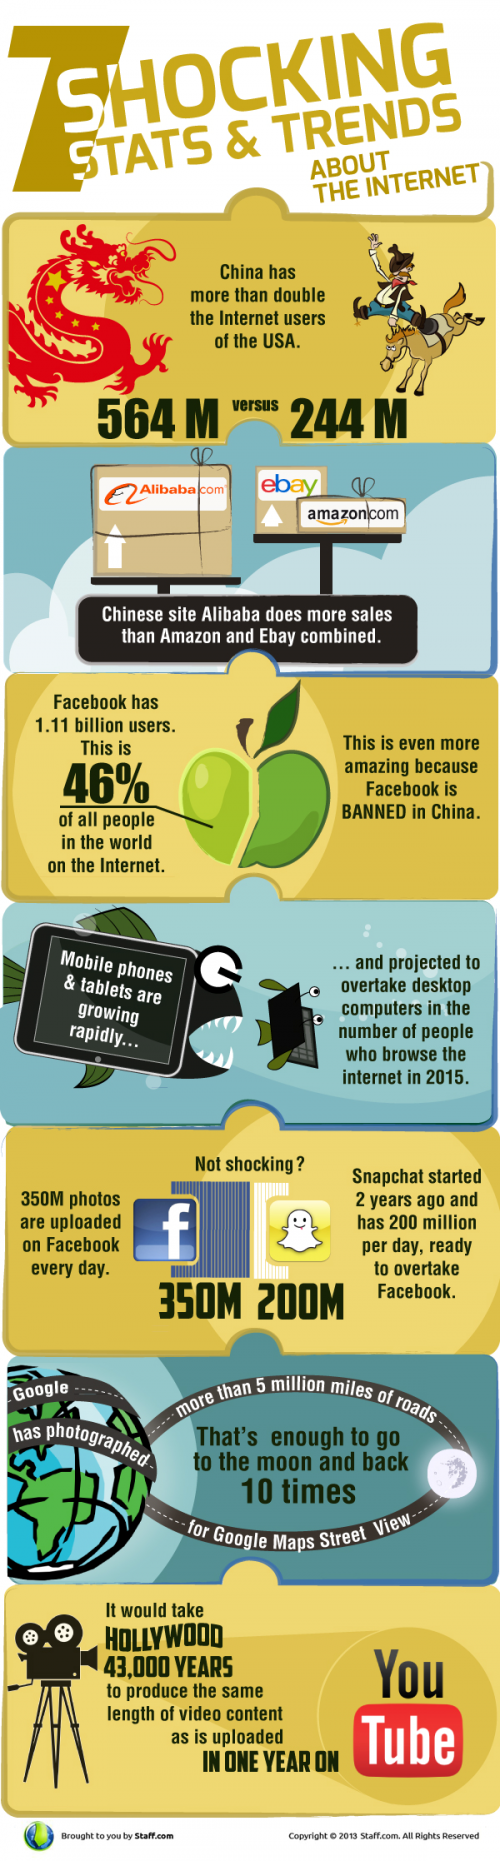 7 Shocking Stats & Trends About The Internet – Infographic